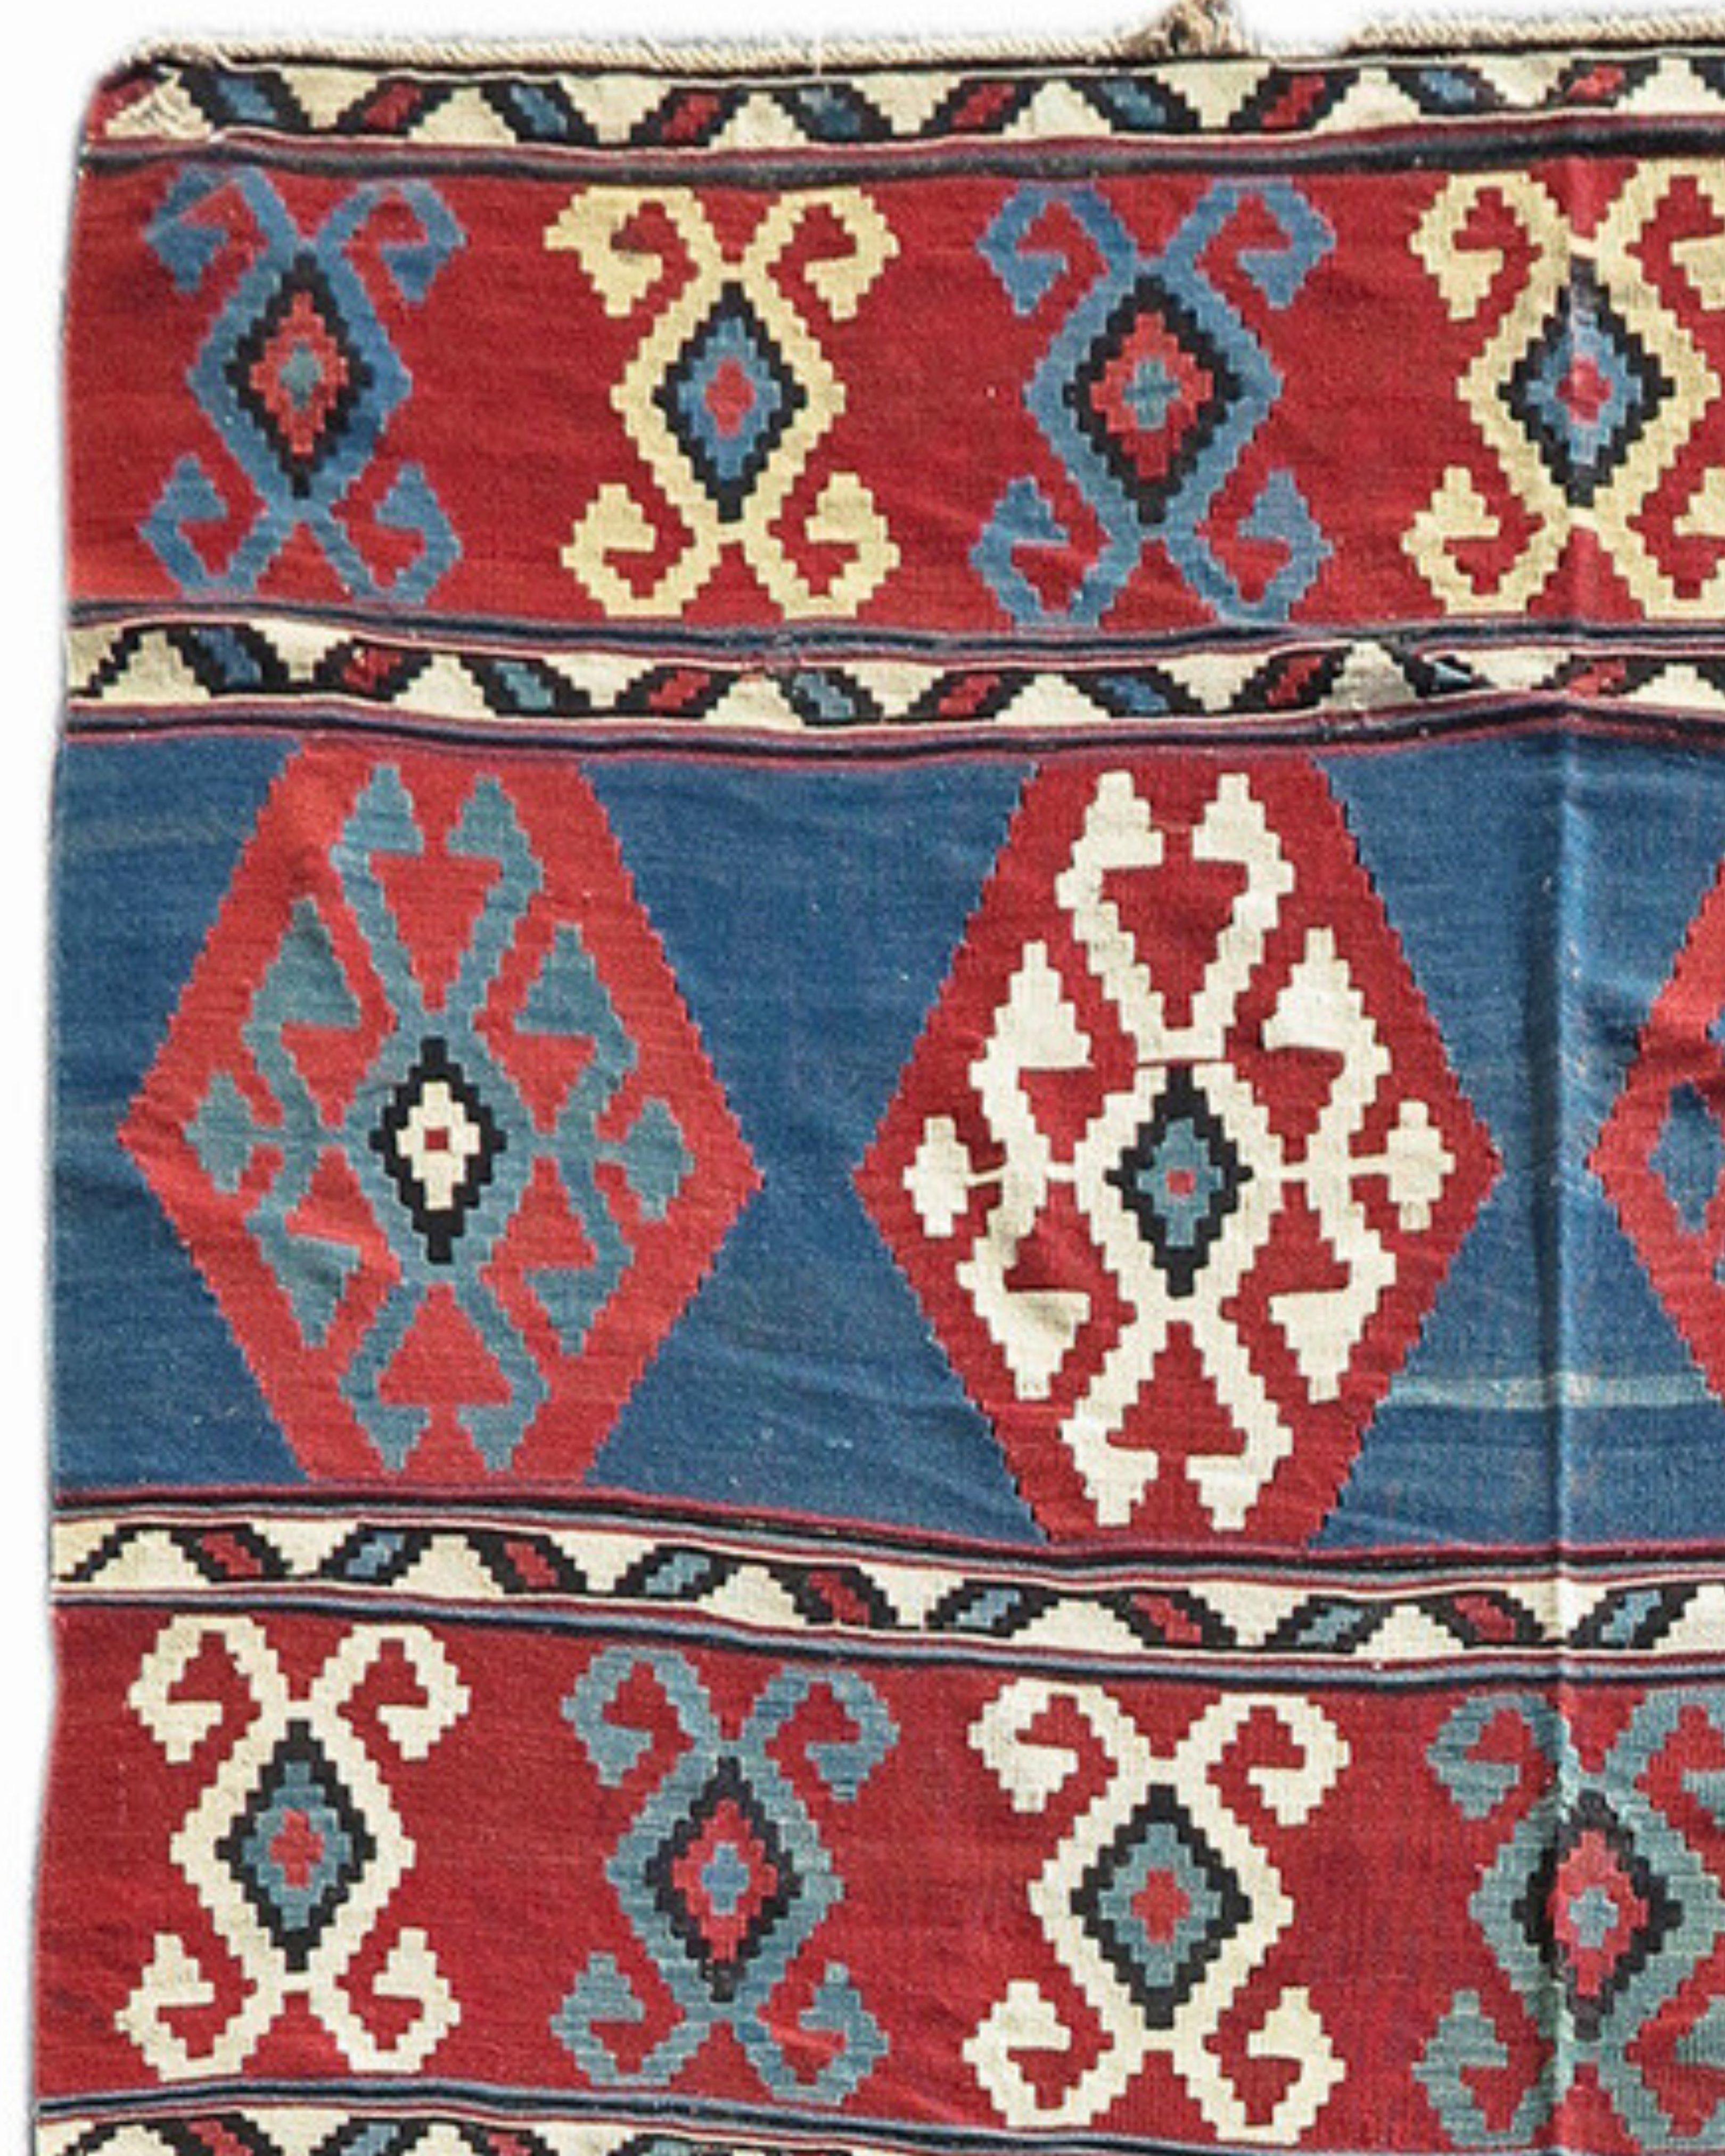 Antique Caucasian Kuba Kilim Rug, Late 19th Century In Excellent Condition For Sale In San Francisco, CA